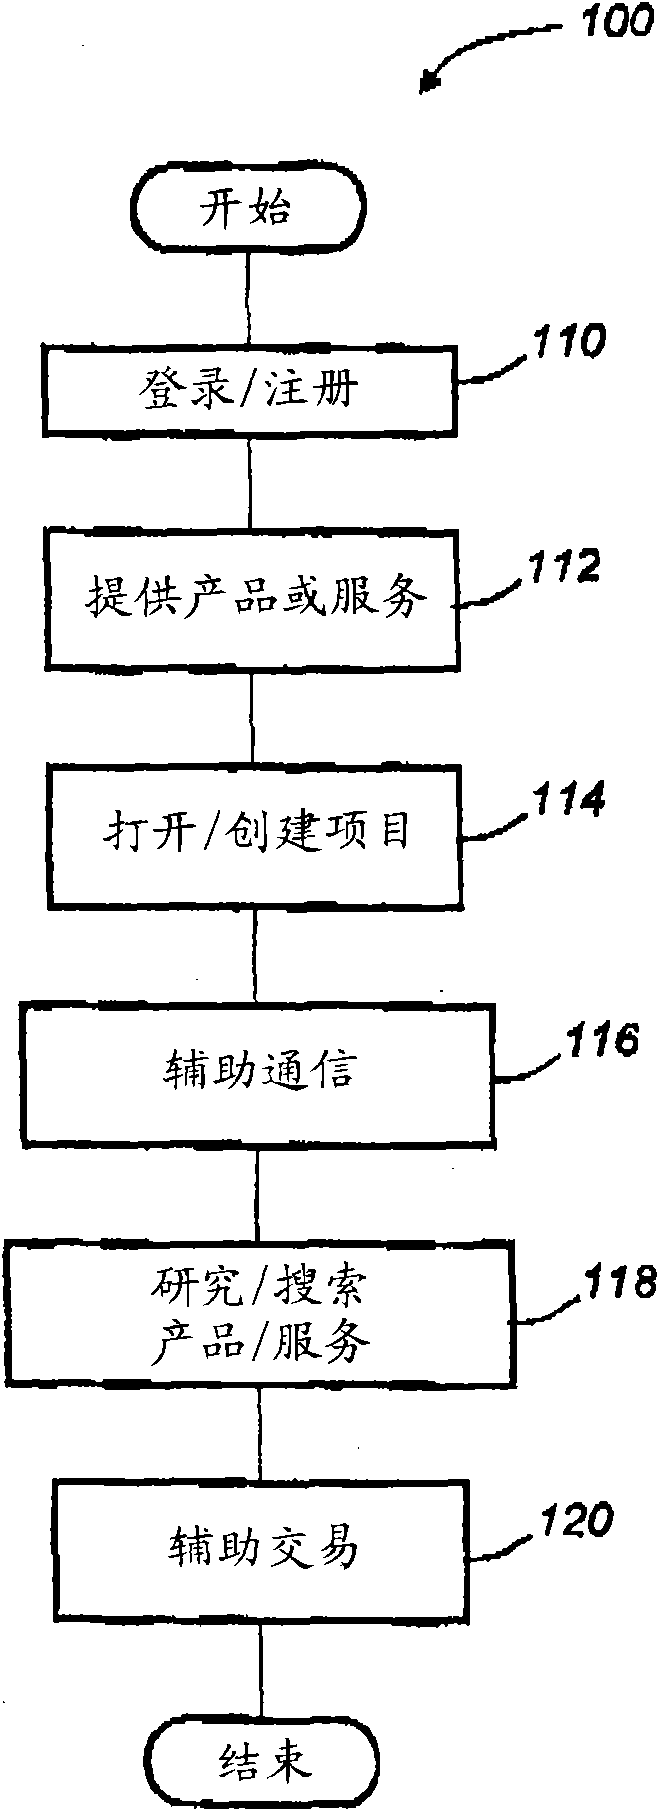 System and method for designing, manufacturing and selling integrated product